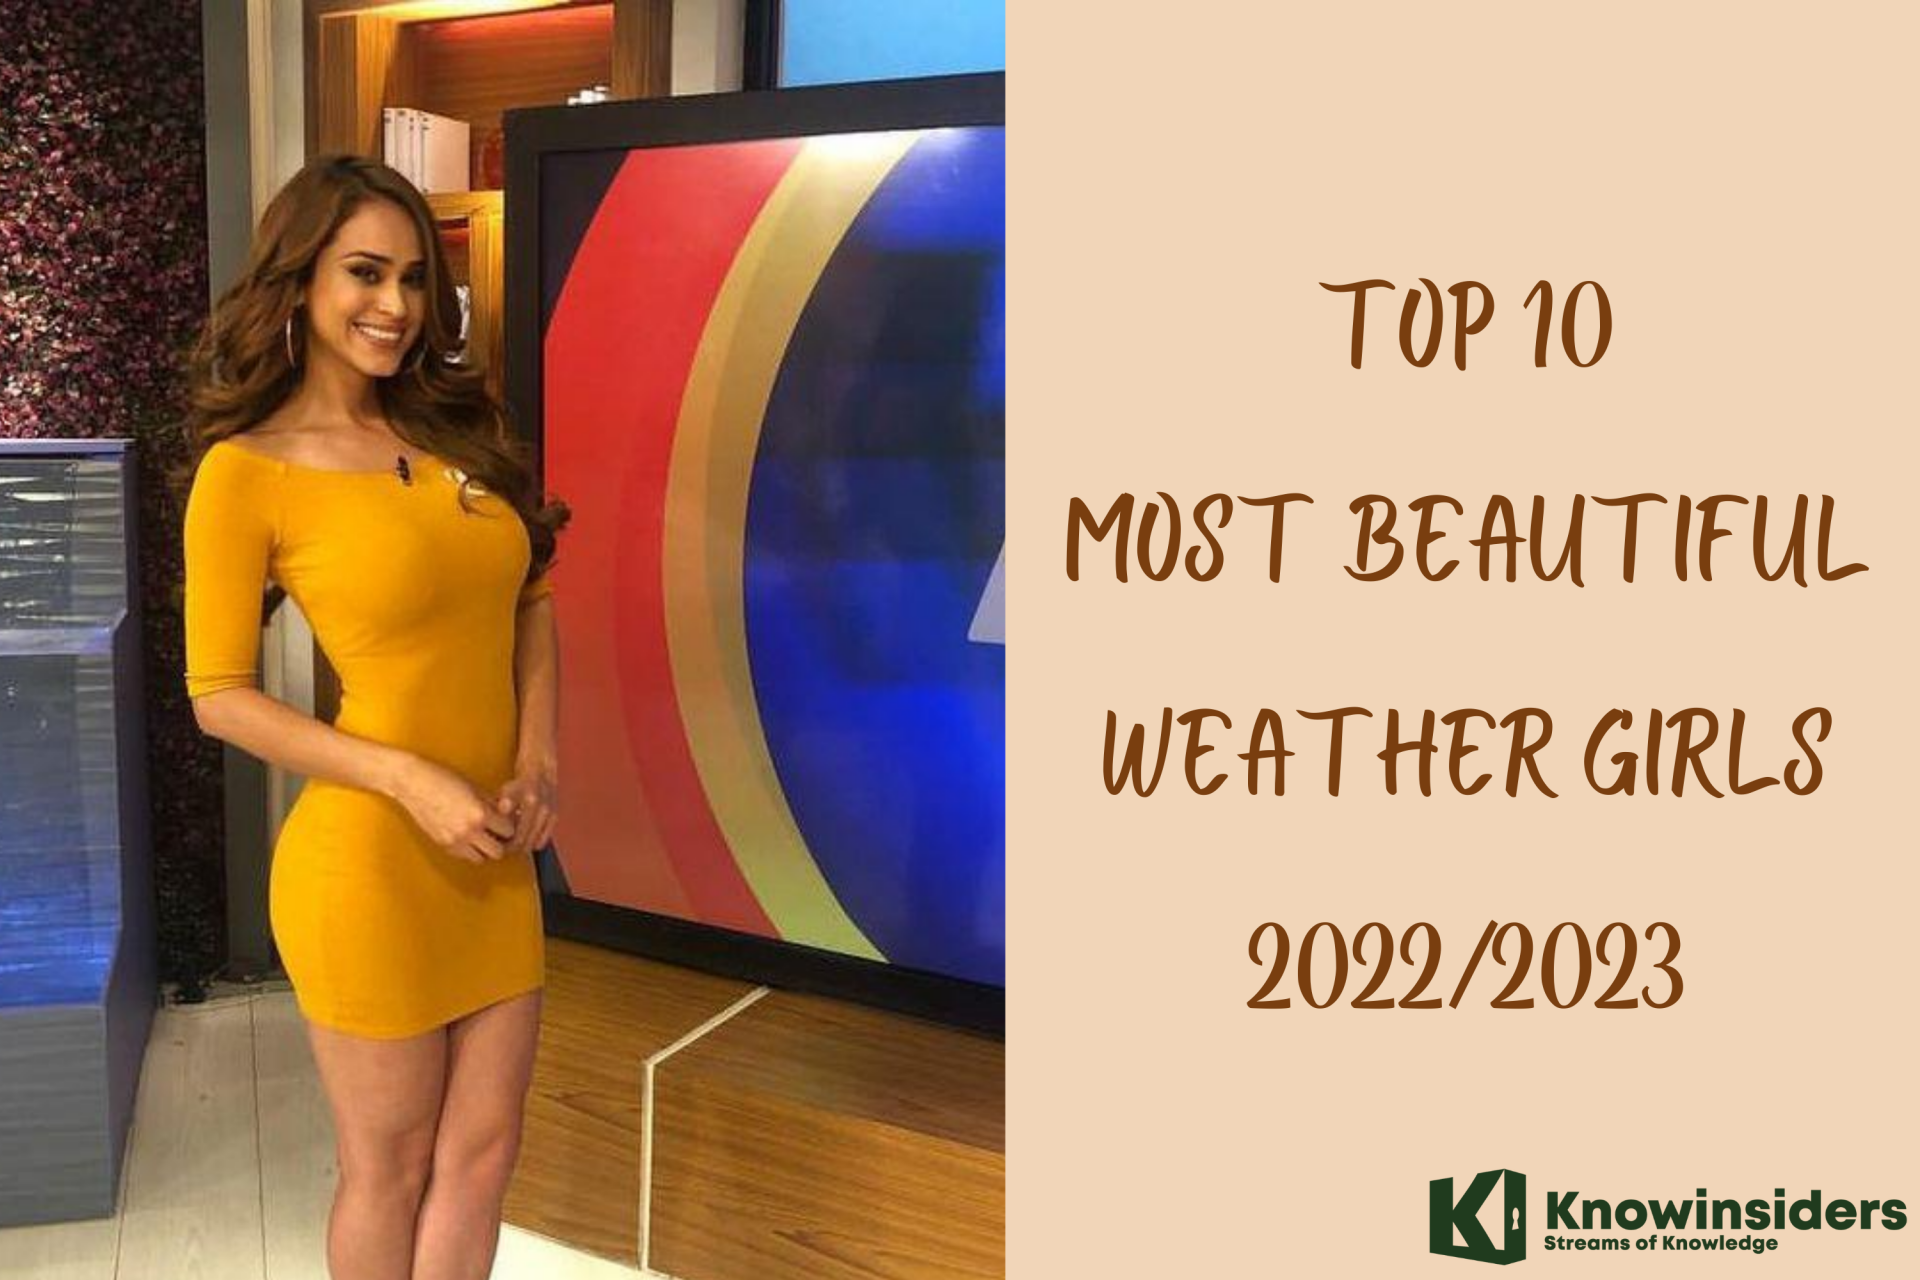 Top 10 Most Beautiful Weather Girls in the US & South America 2022/2023